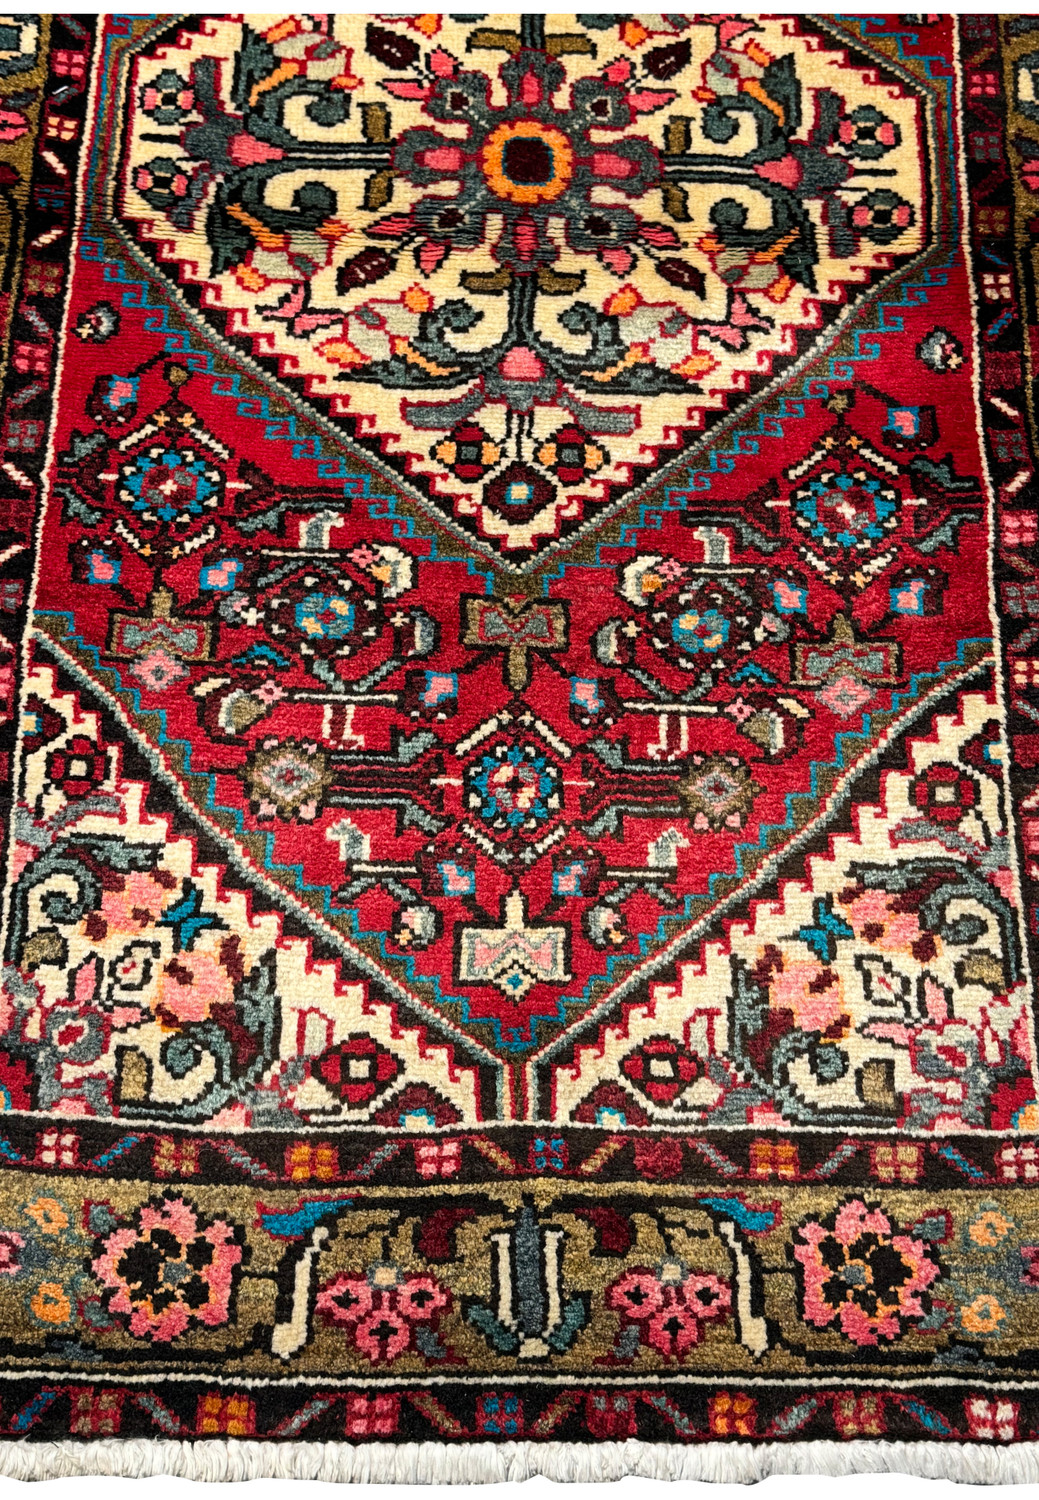 Detailed image of the Persian Hamedan rug showcasing the fine craftsmanship and vivid colors."